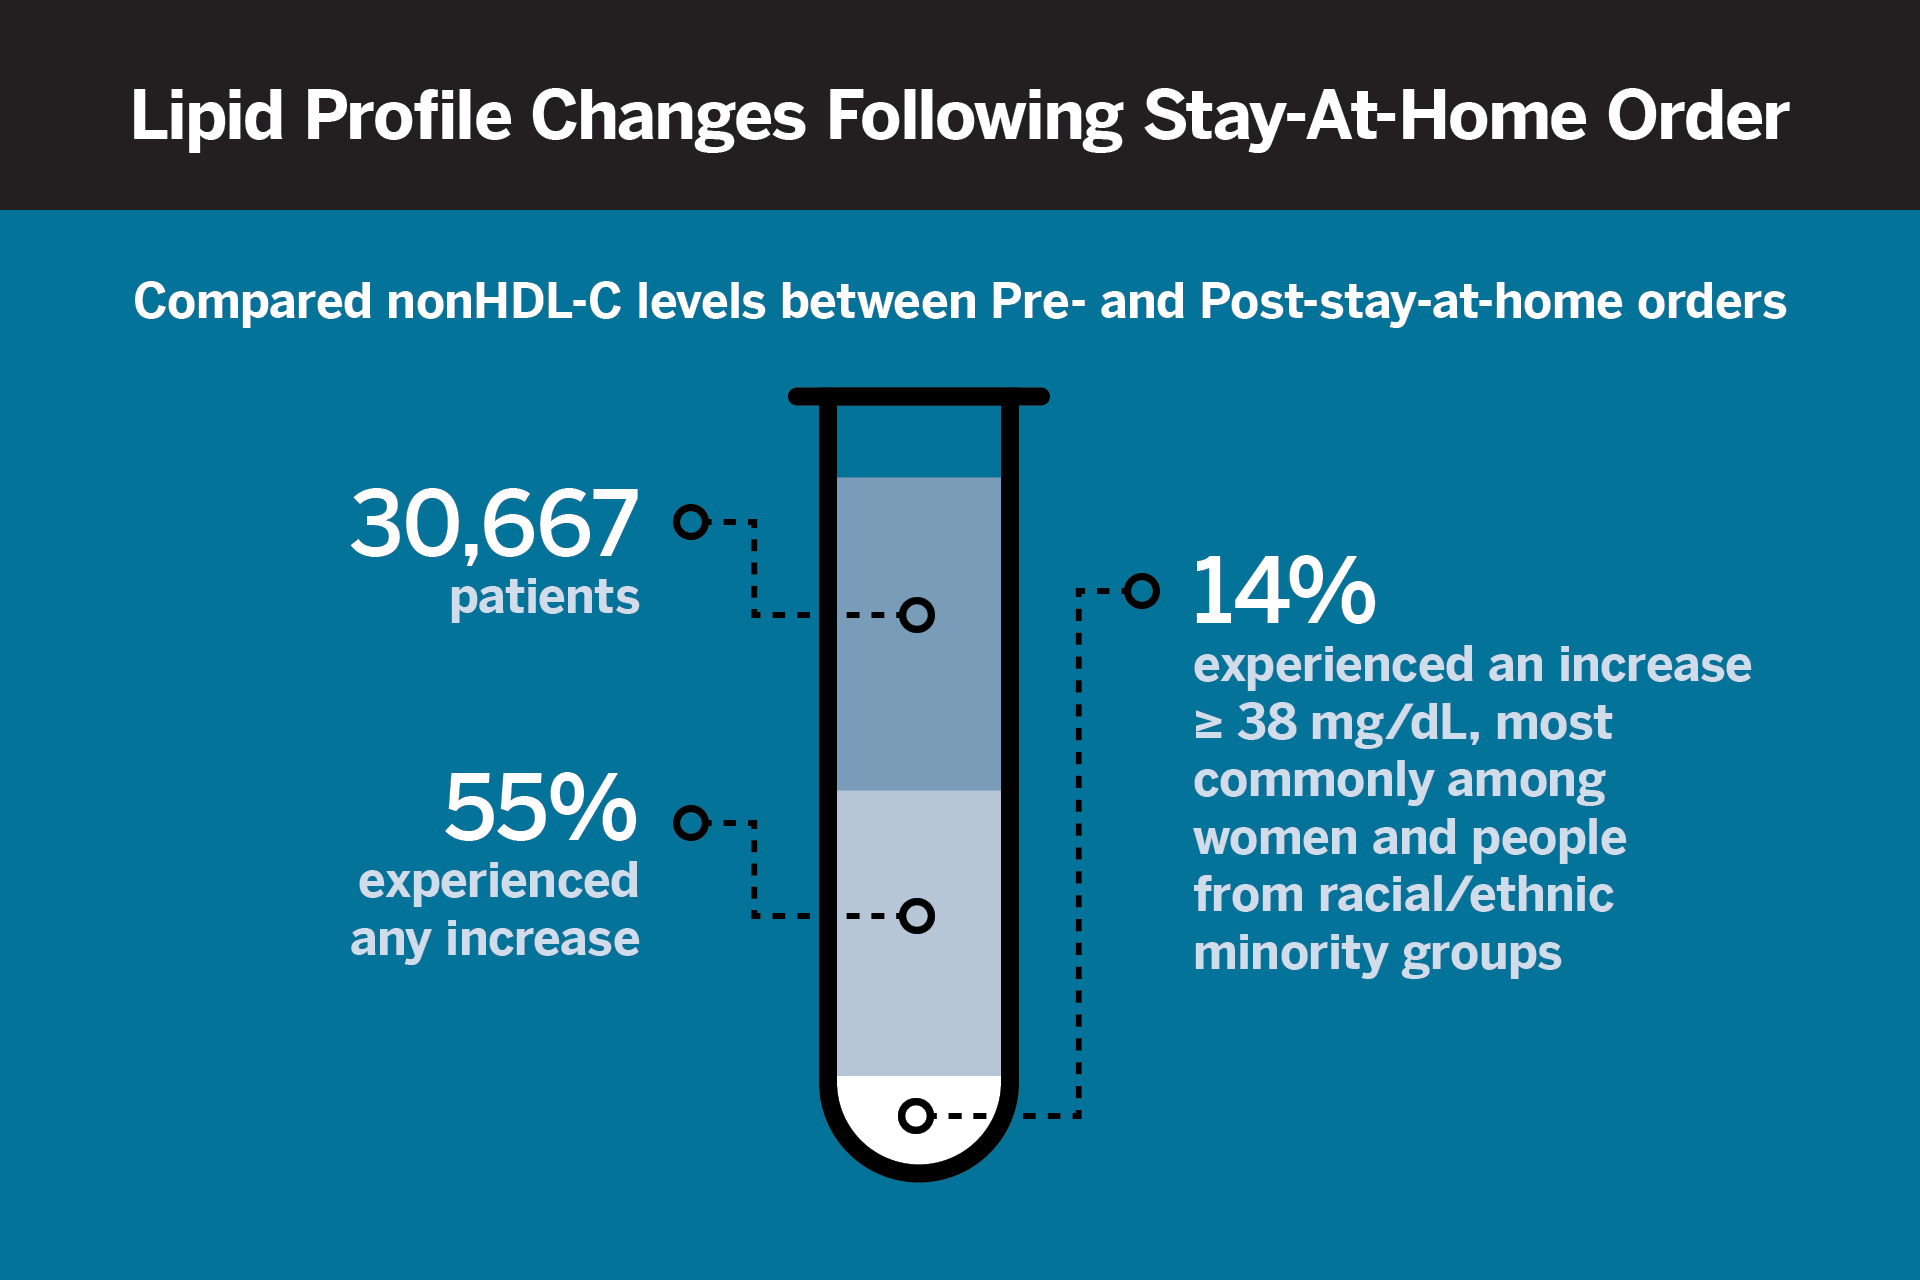 Lipid Profile Changes Following Stay-at-Home Order